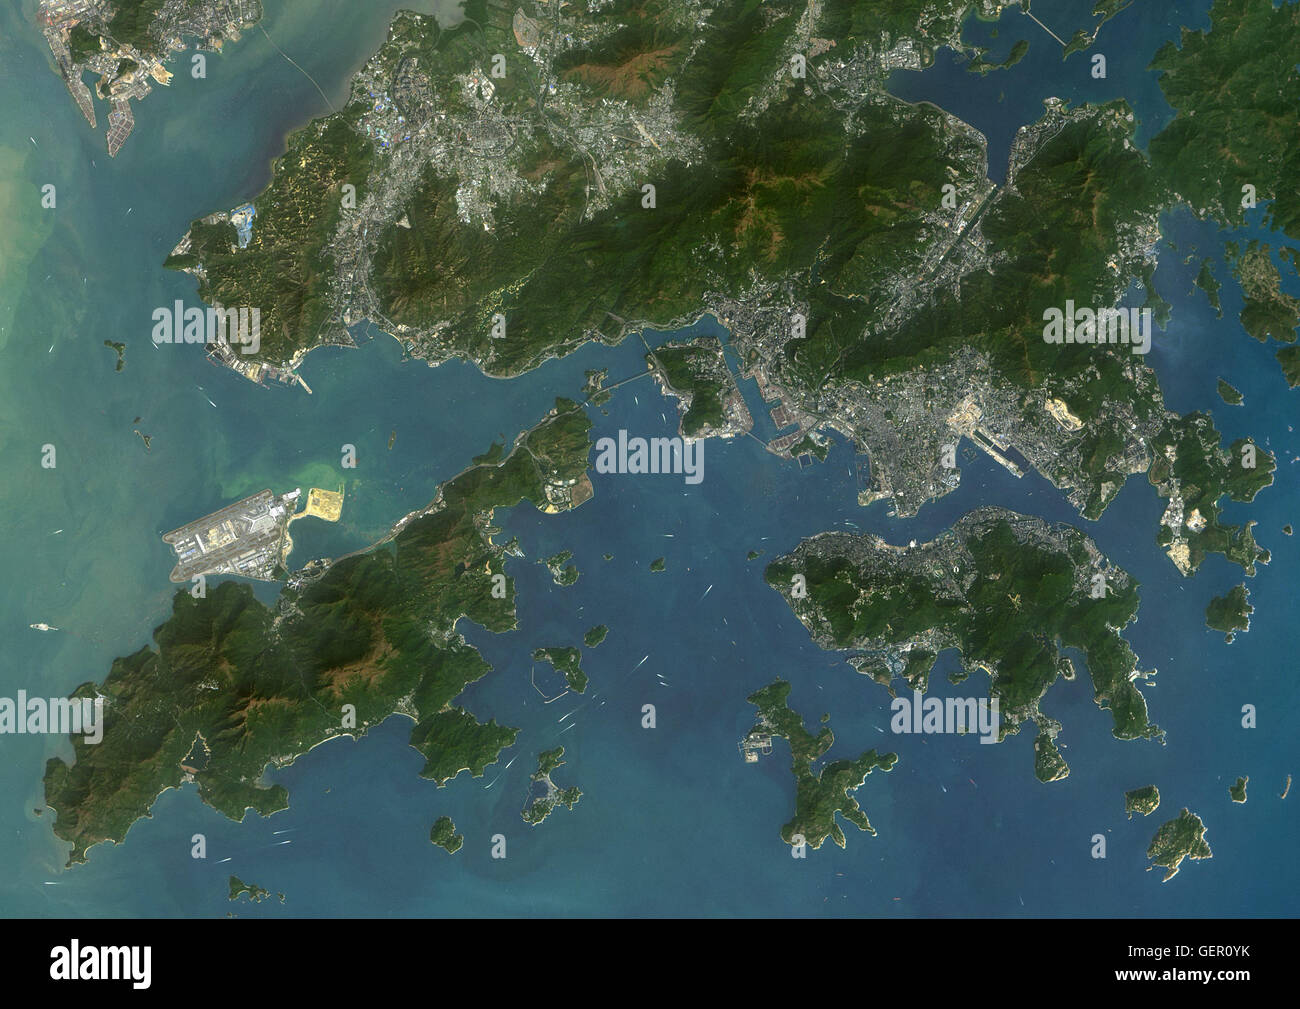 Satellite view of Hong Kong. This image was compiled from data acquired by Landsat 8 satellite in 2015. Stock Photo